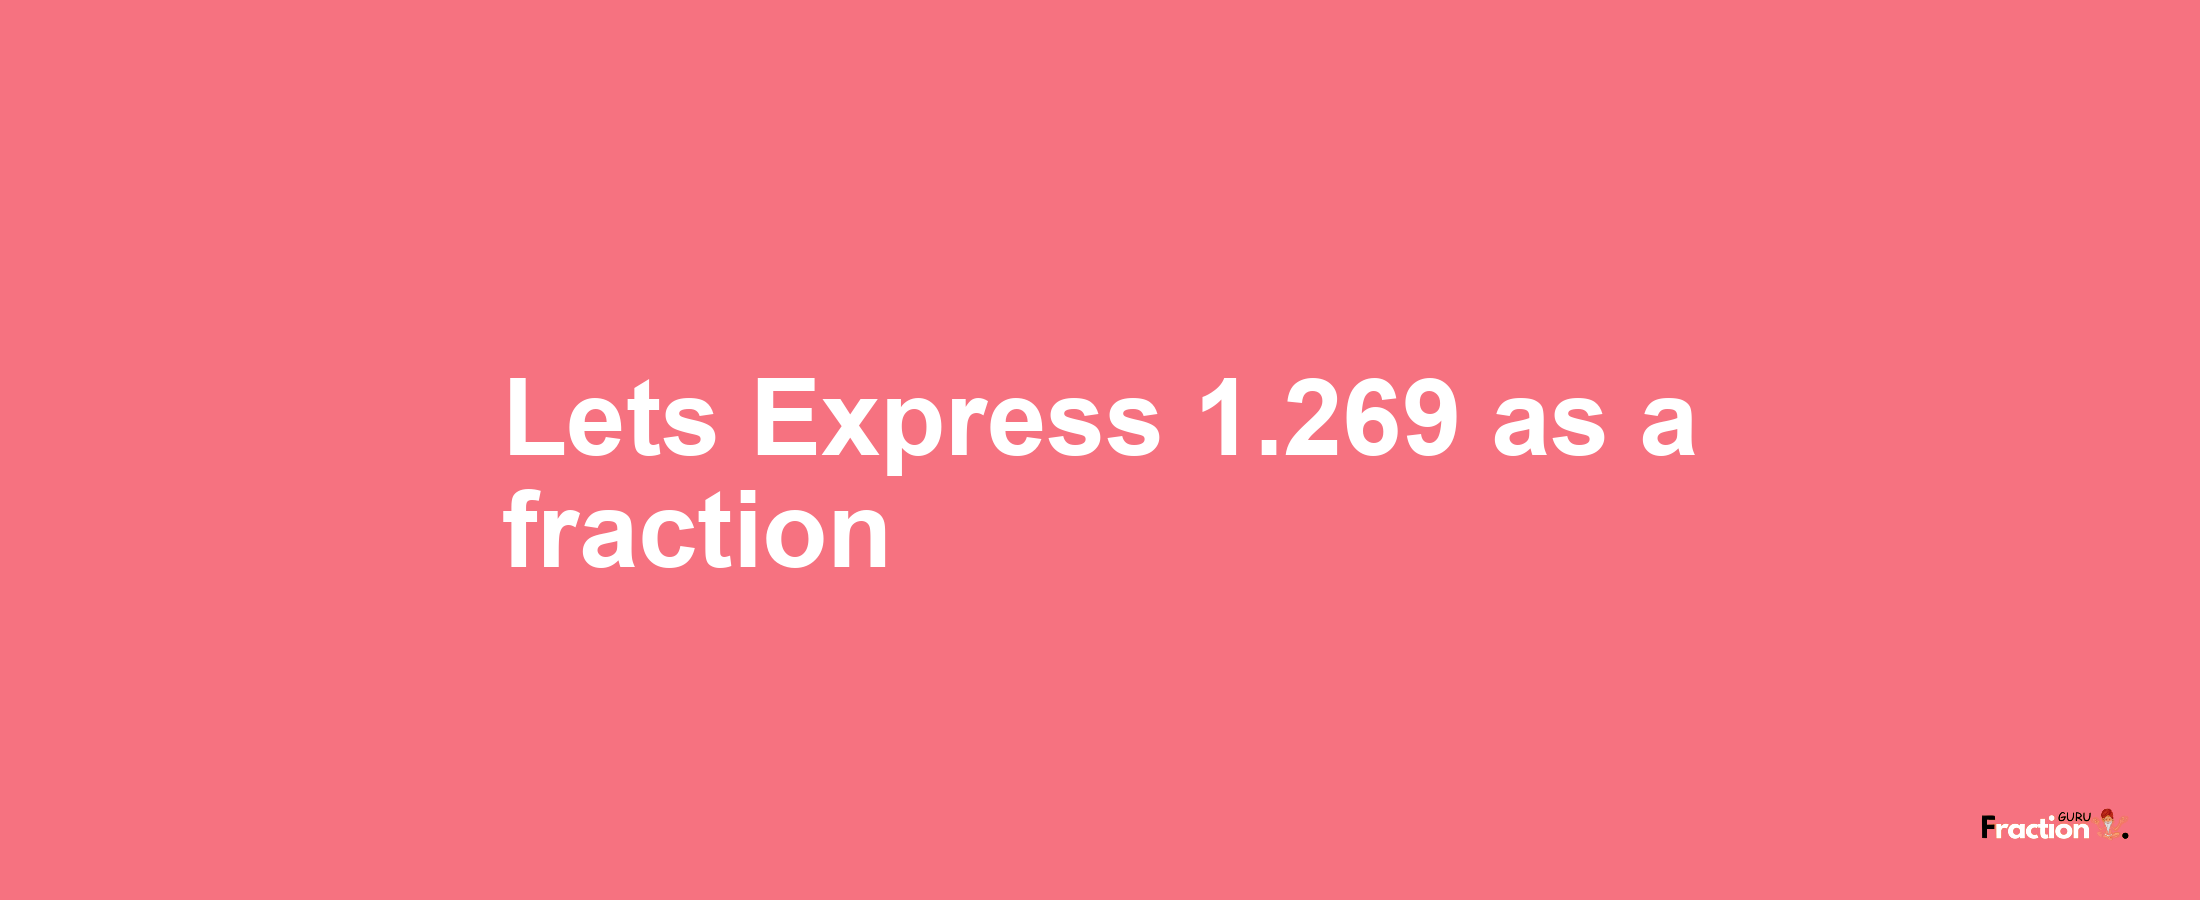 Lets Express 1.269 as afraction